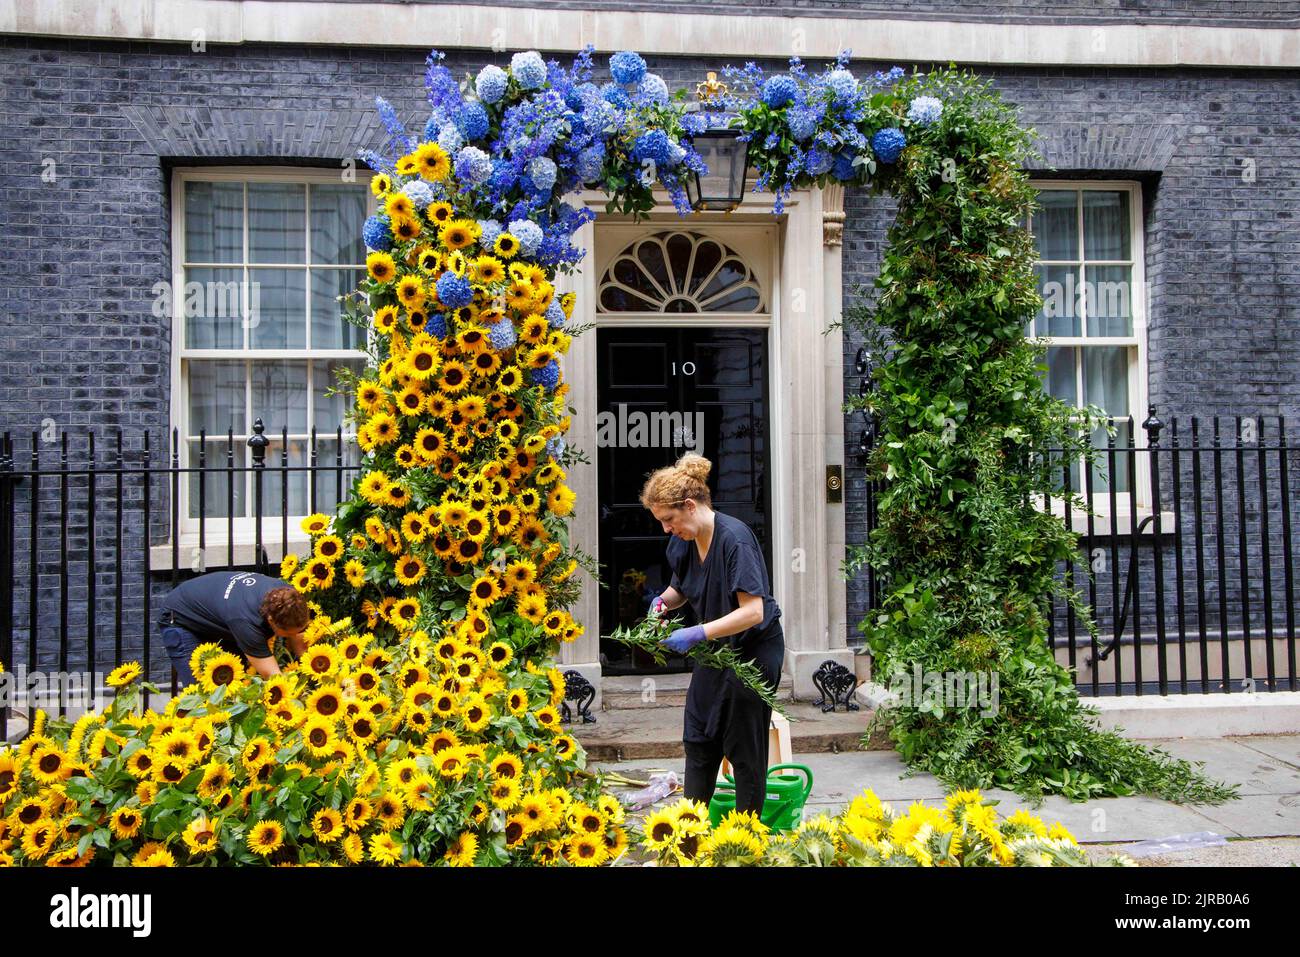 London, UK. 23rd Aug, 2022. The finishing touches are put on the floral display at Number 10 Downing Street to mark independence day for Ukraine which is tomorrow, August 24th. Credit: Mark Thomas/Alamy Live News Stock Photo